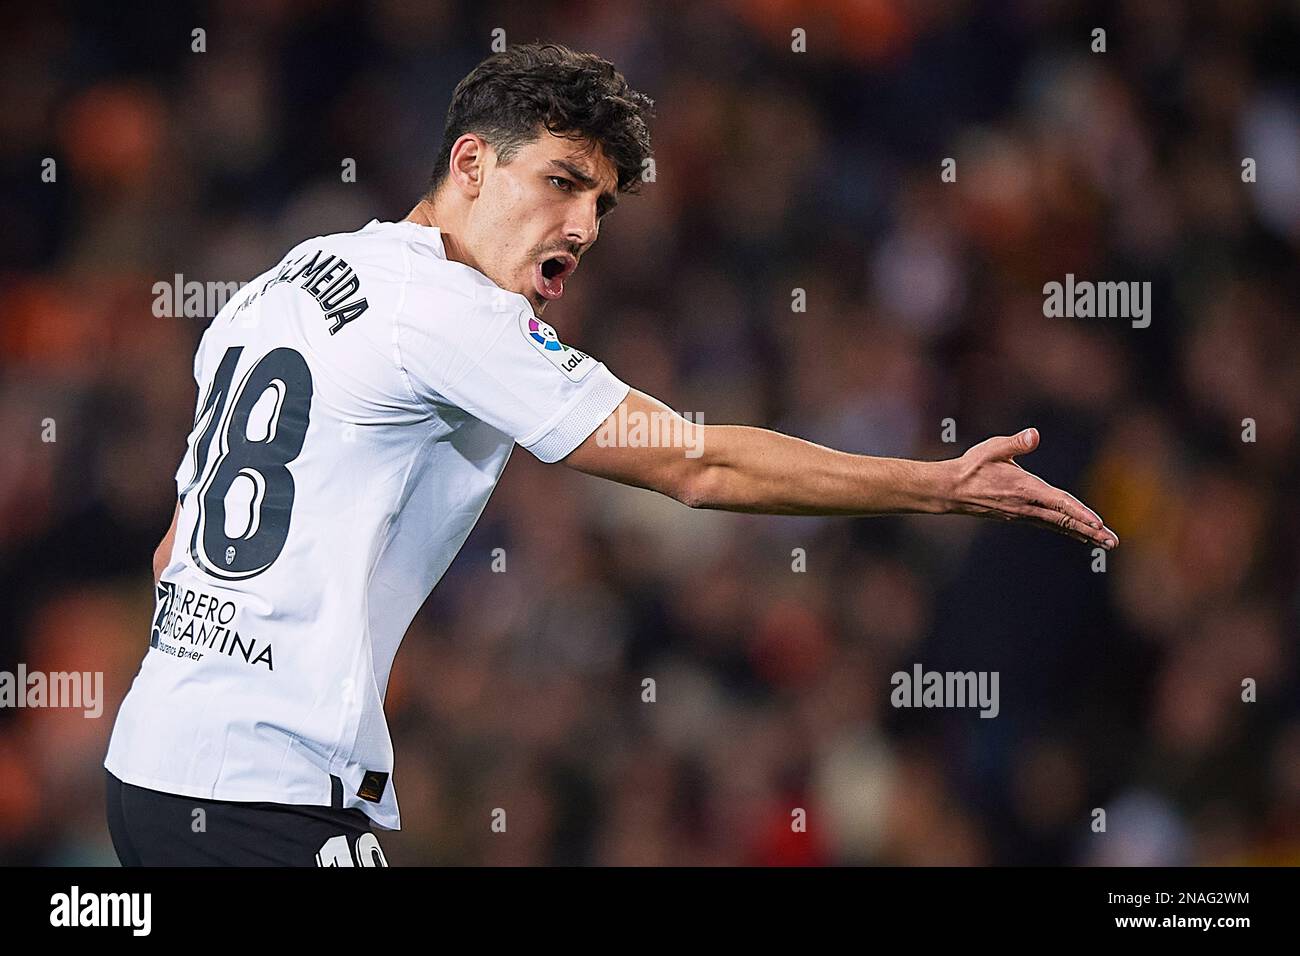 Andre Almeida of Valencia during the La Liga match between Valencia and Athletic Club played at Mestalla Stadium on February 11 in Valencia, Spain. (Photo by PRESSIN) Stock Photo